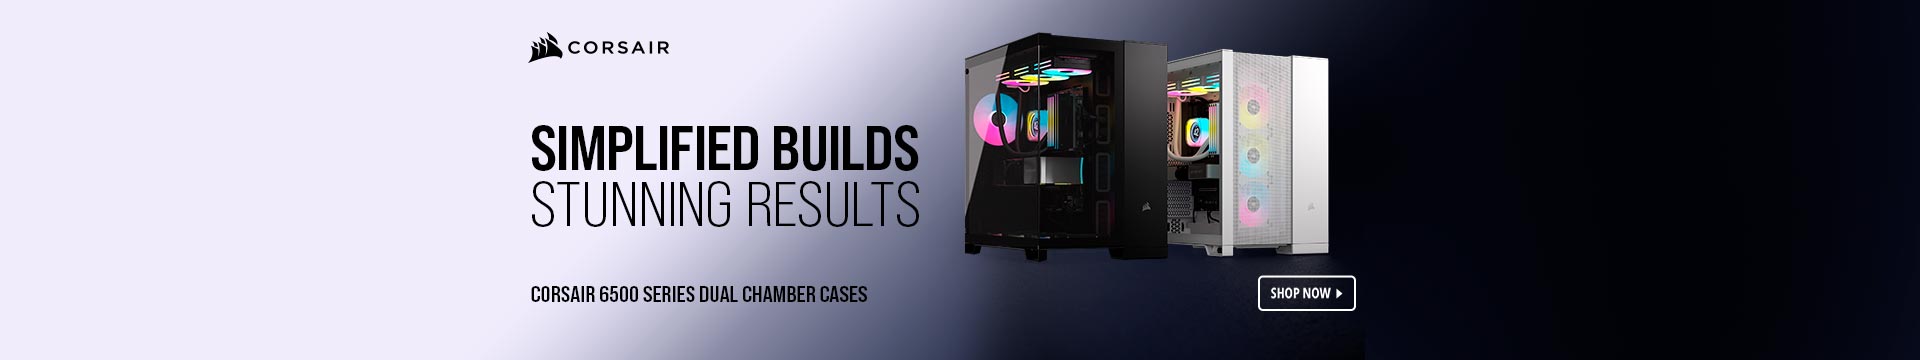 SIMPLIFIED BUILDS STUNNING RESULTS